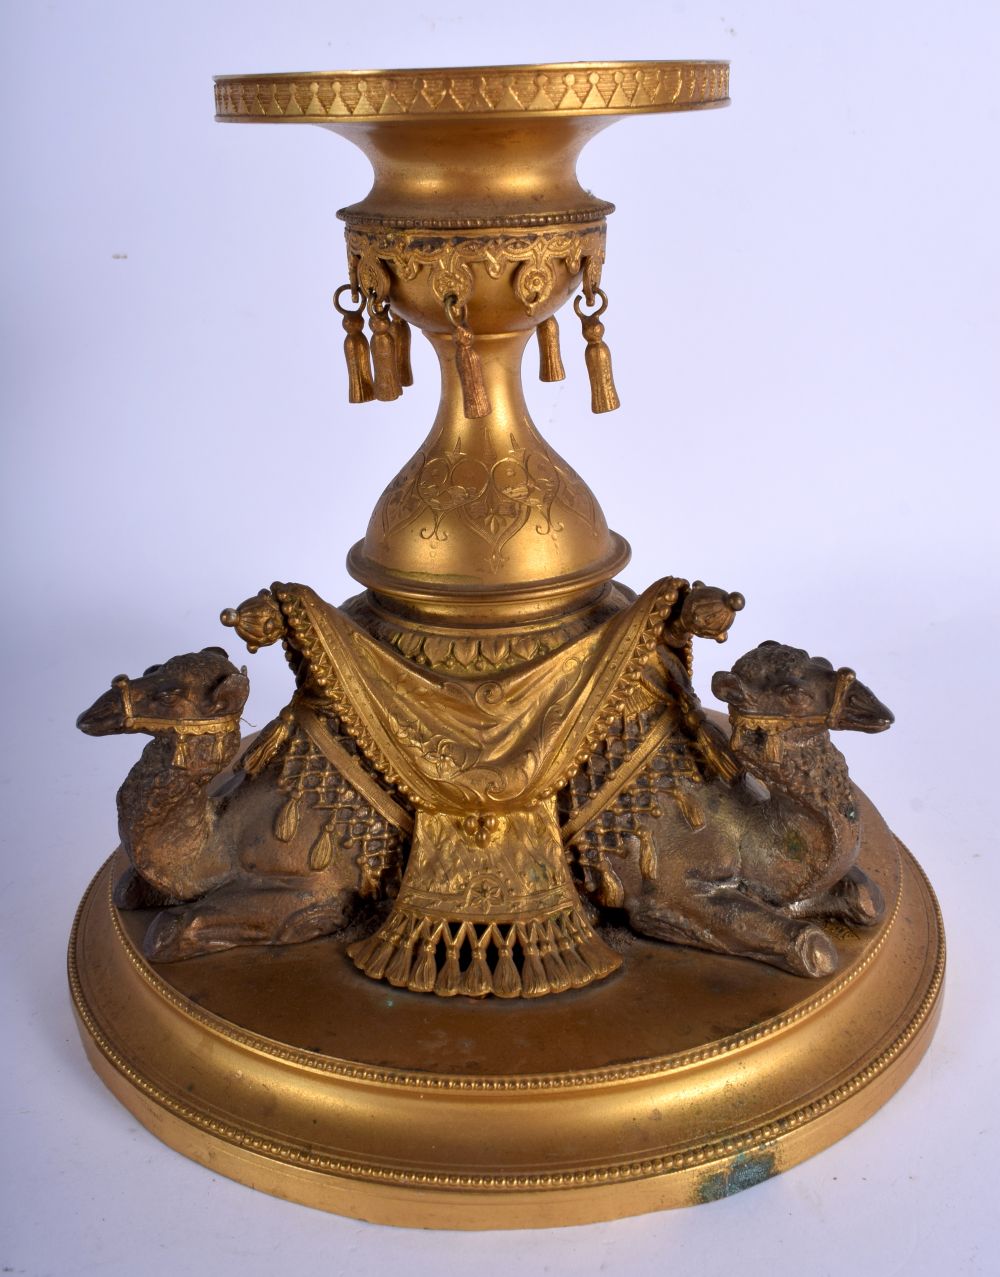 A LATE 19TH CENTURY FRENCH EGYPTIAN REVIVAL GILT METAL TABLE CENTREPIECE formed with recumbent camel - Image 2 of 4